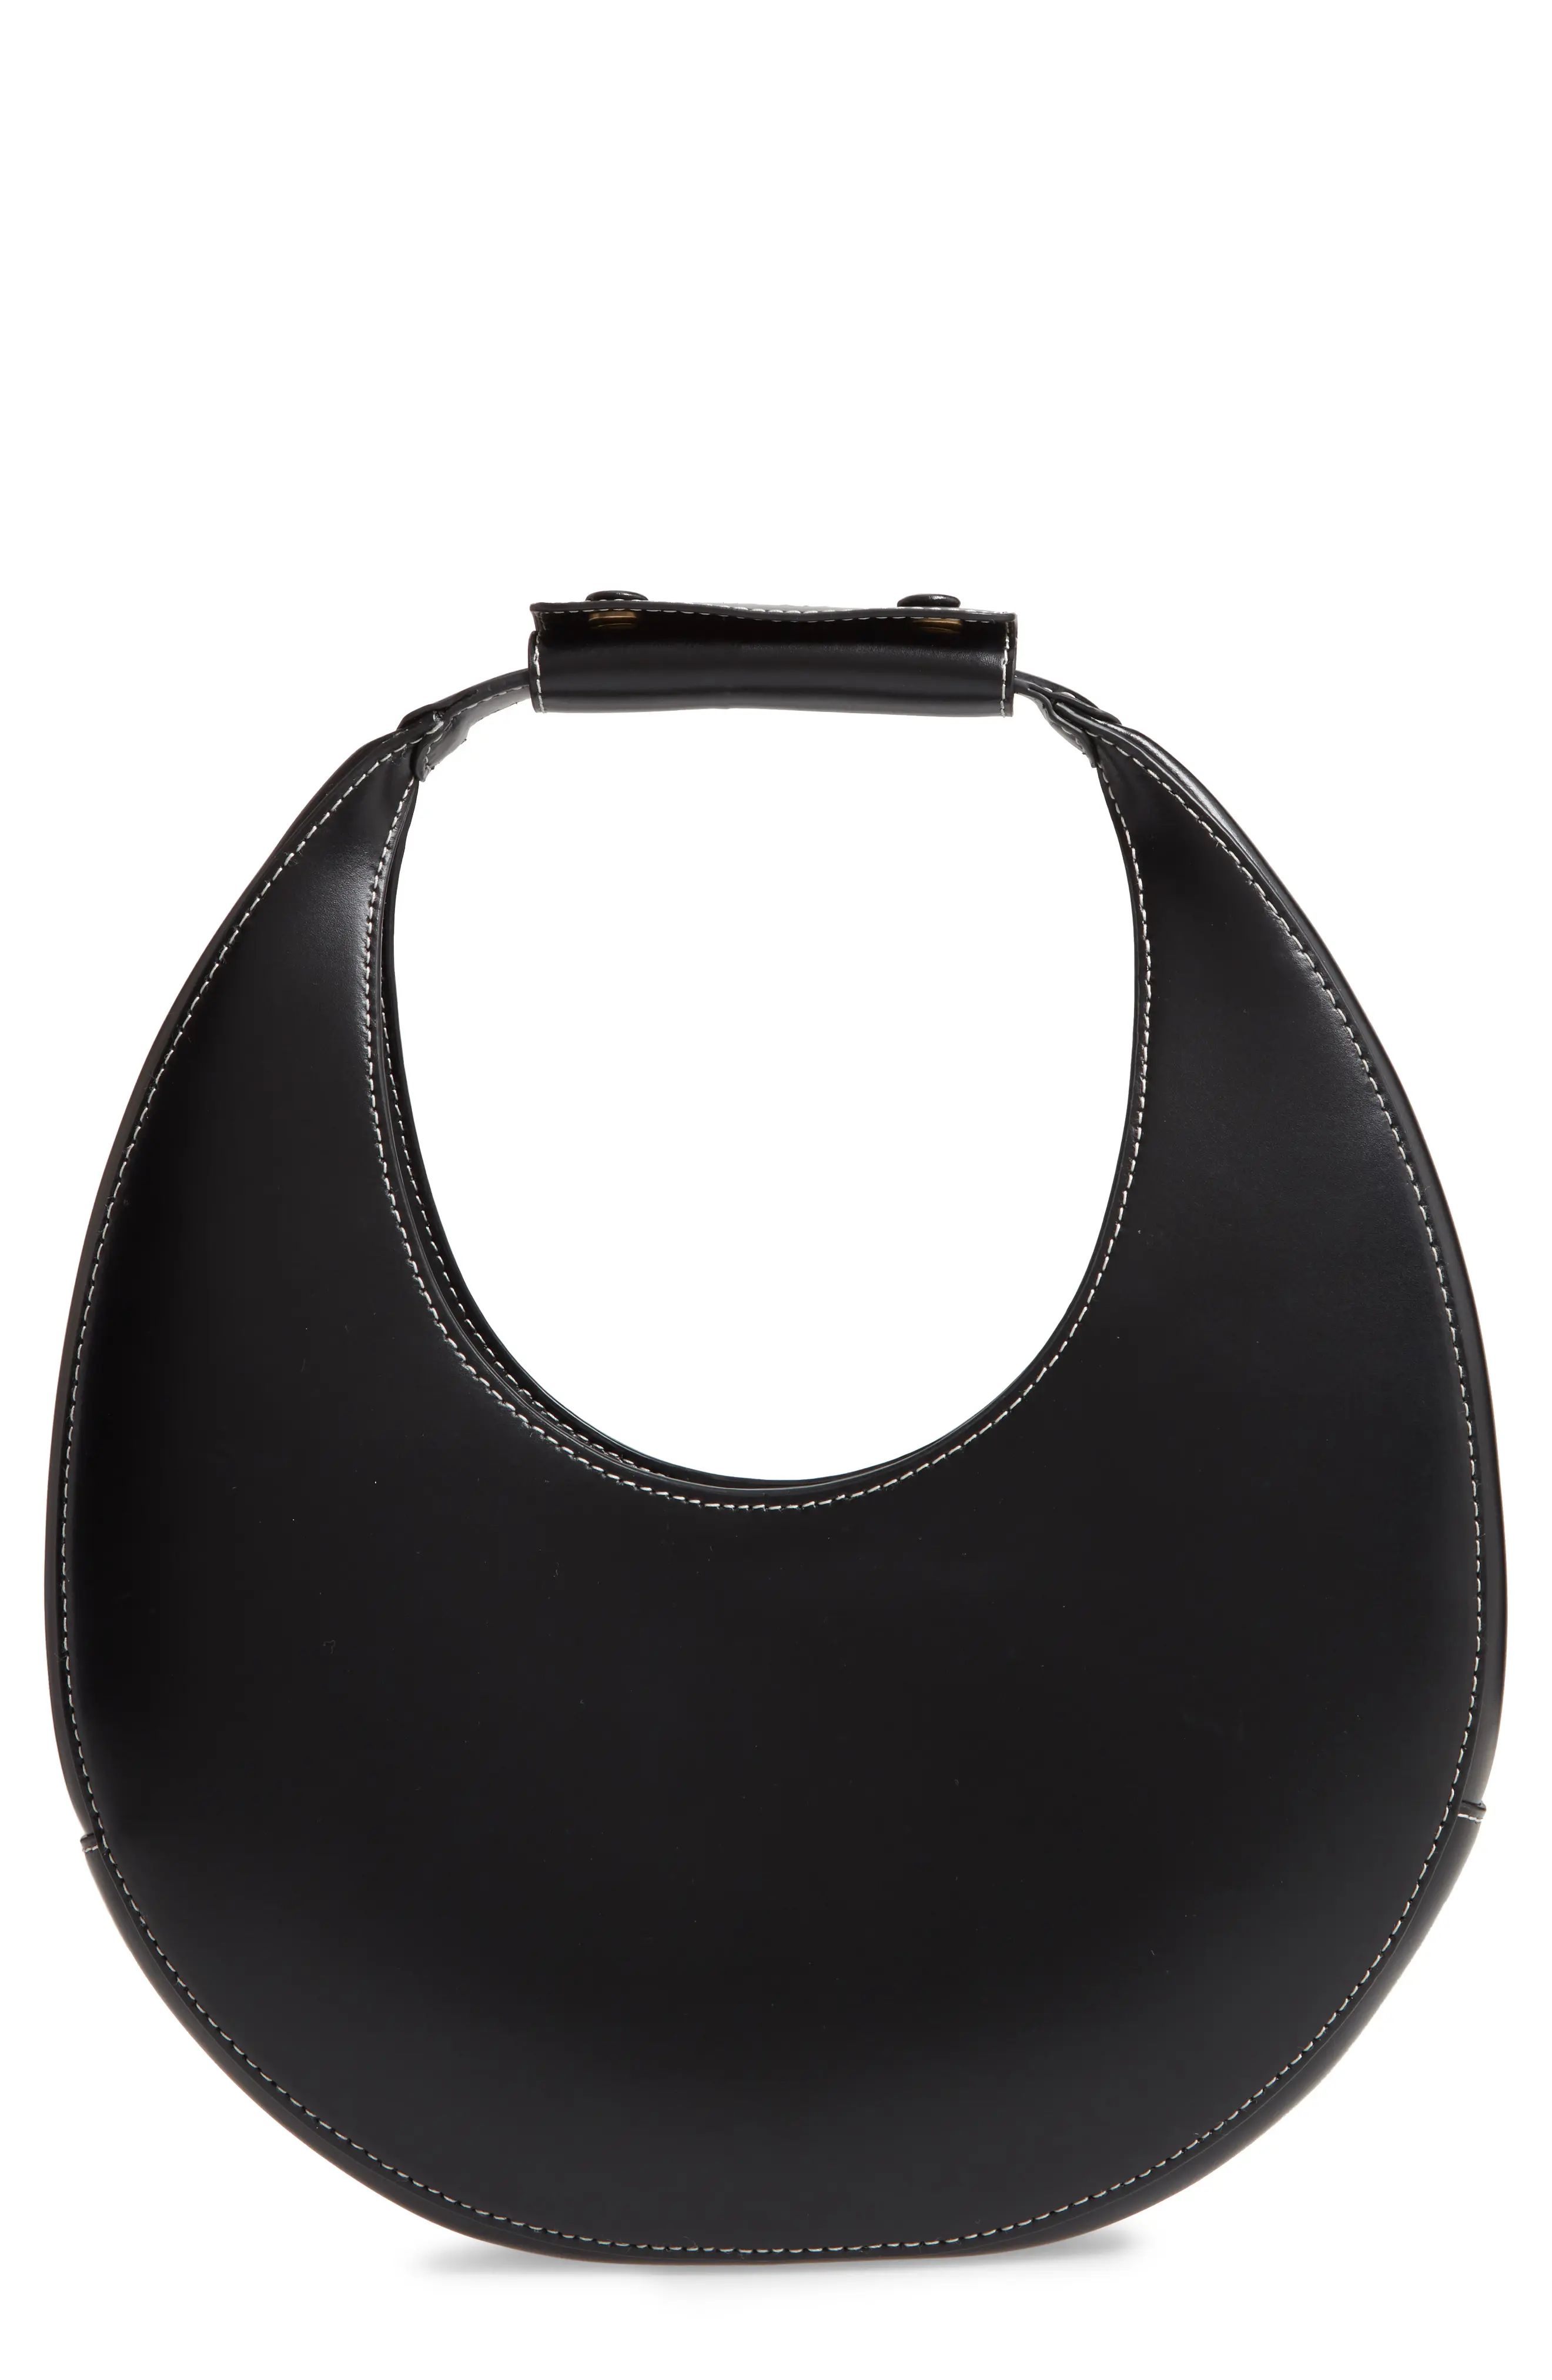 STAUD Leather Moon Bag in Black at Nordstrom | Nordstrom